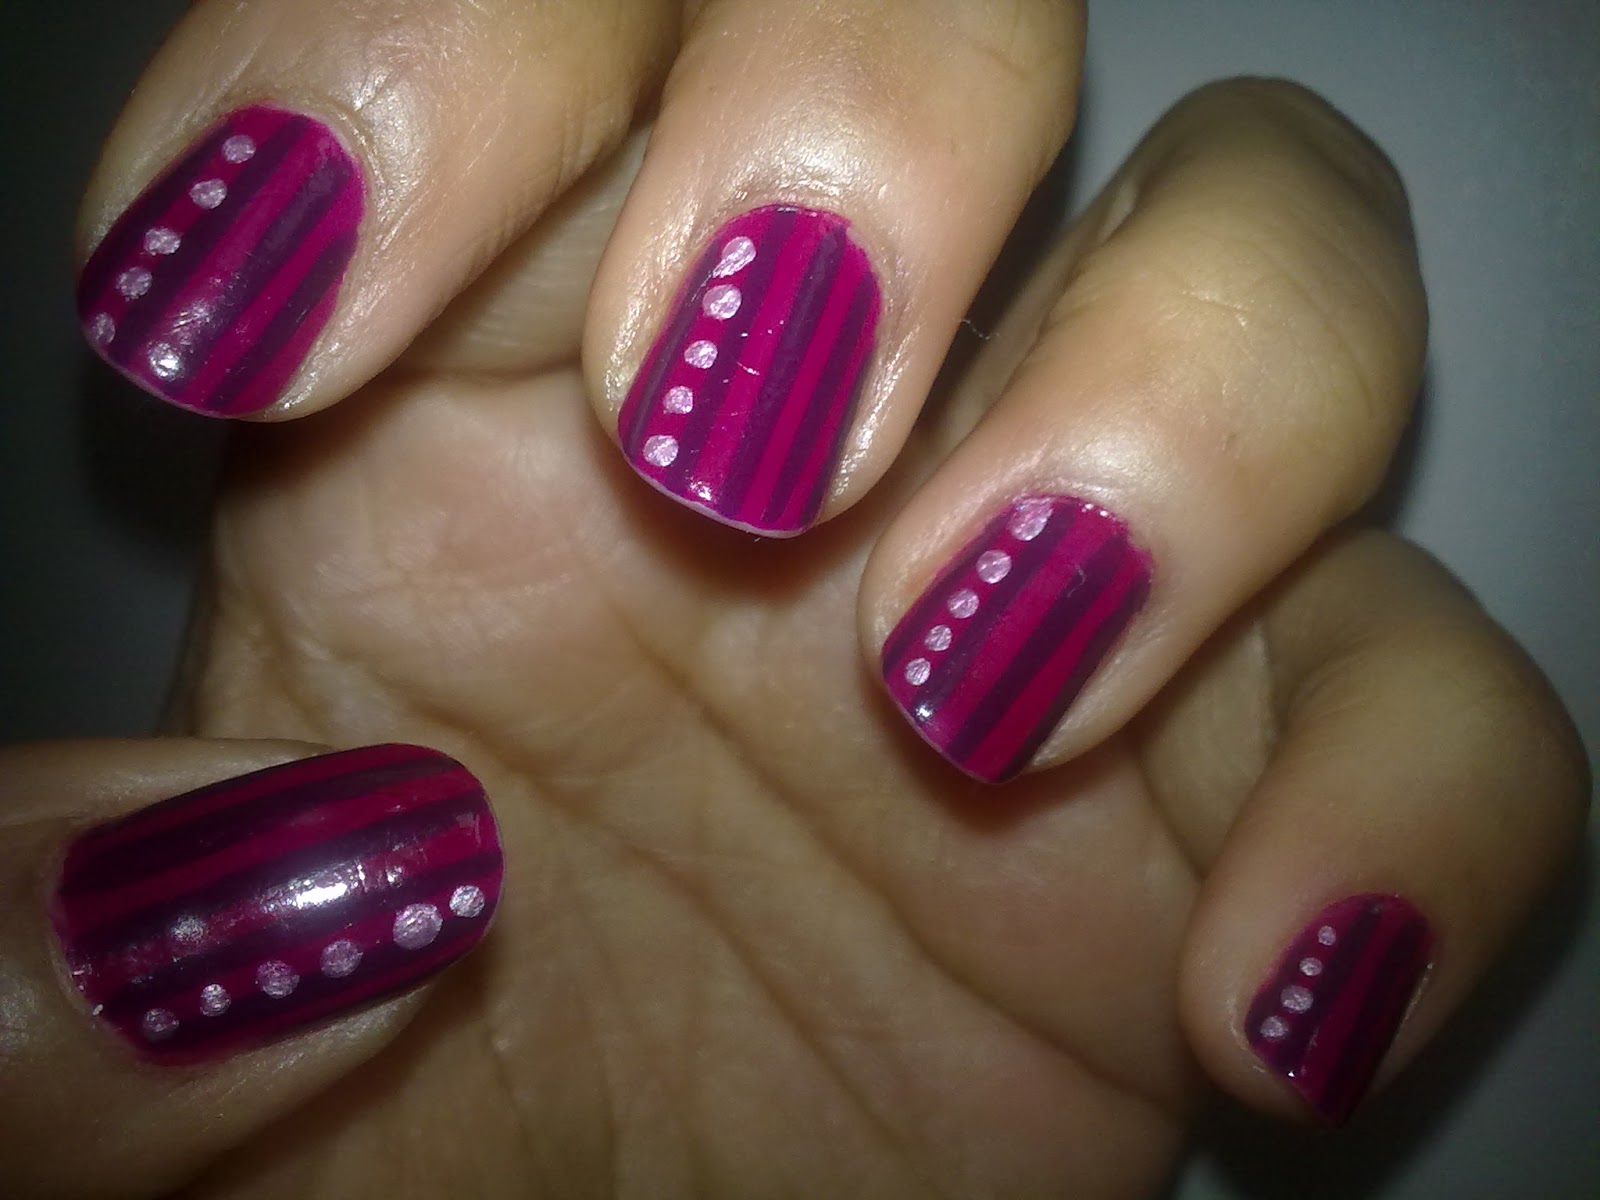 nail art design with lines and dots